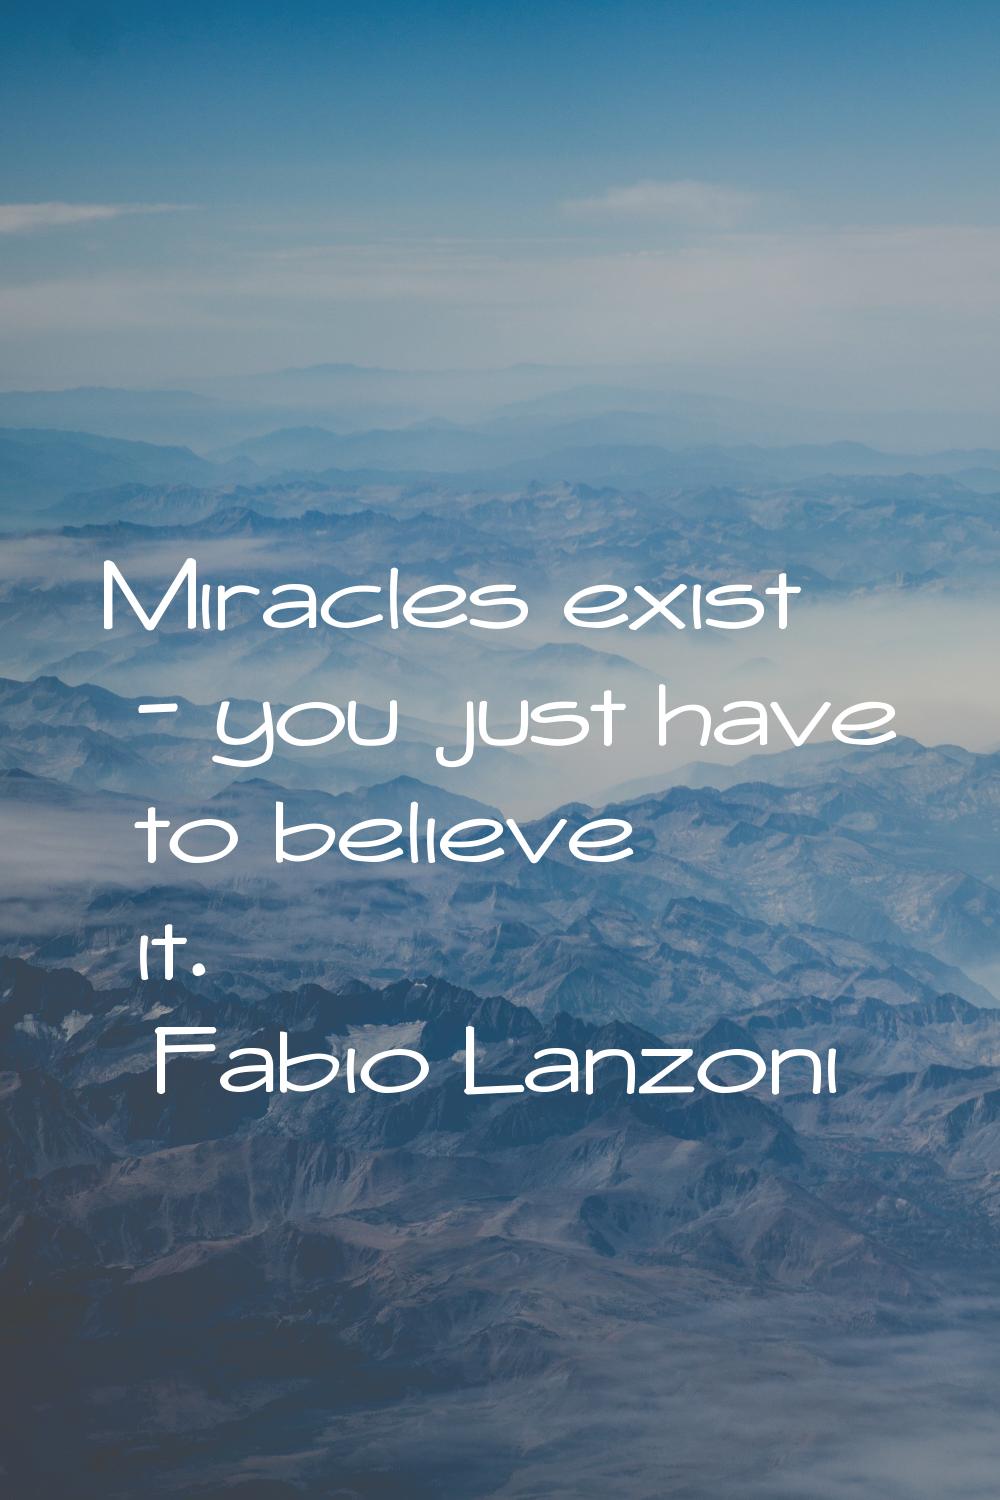 Miracles exist - you just have to believe it.